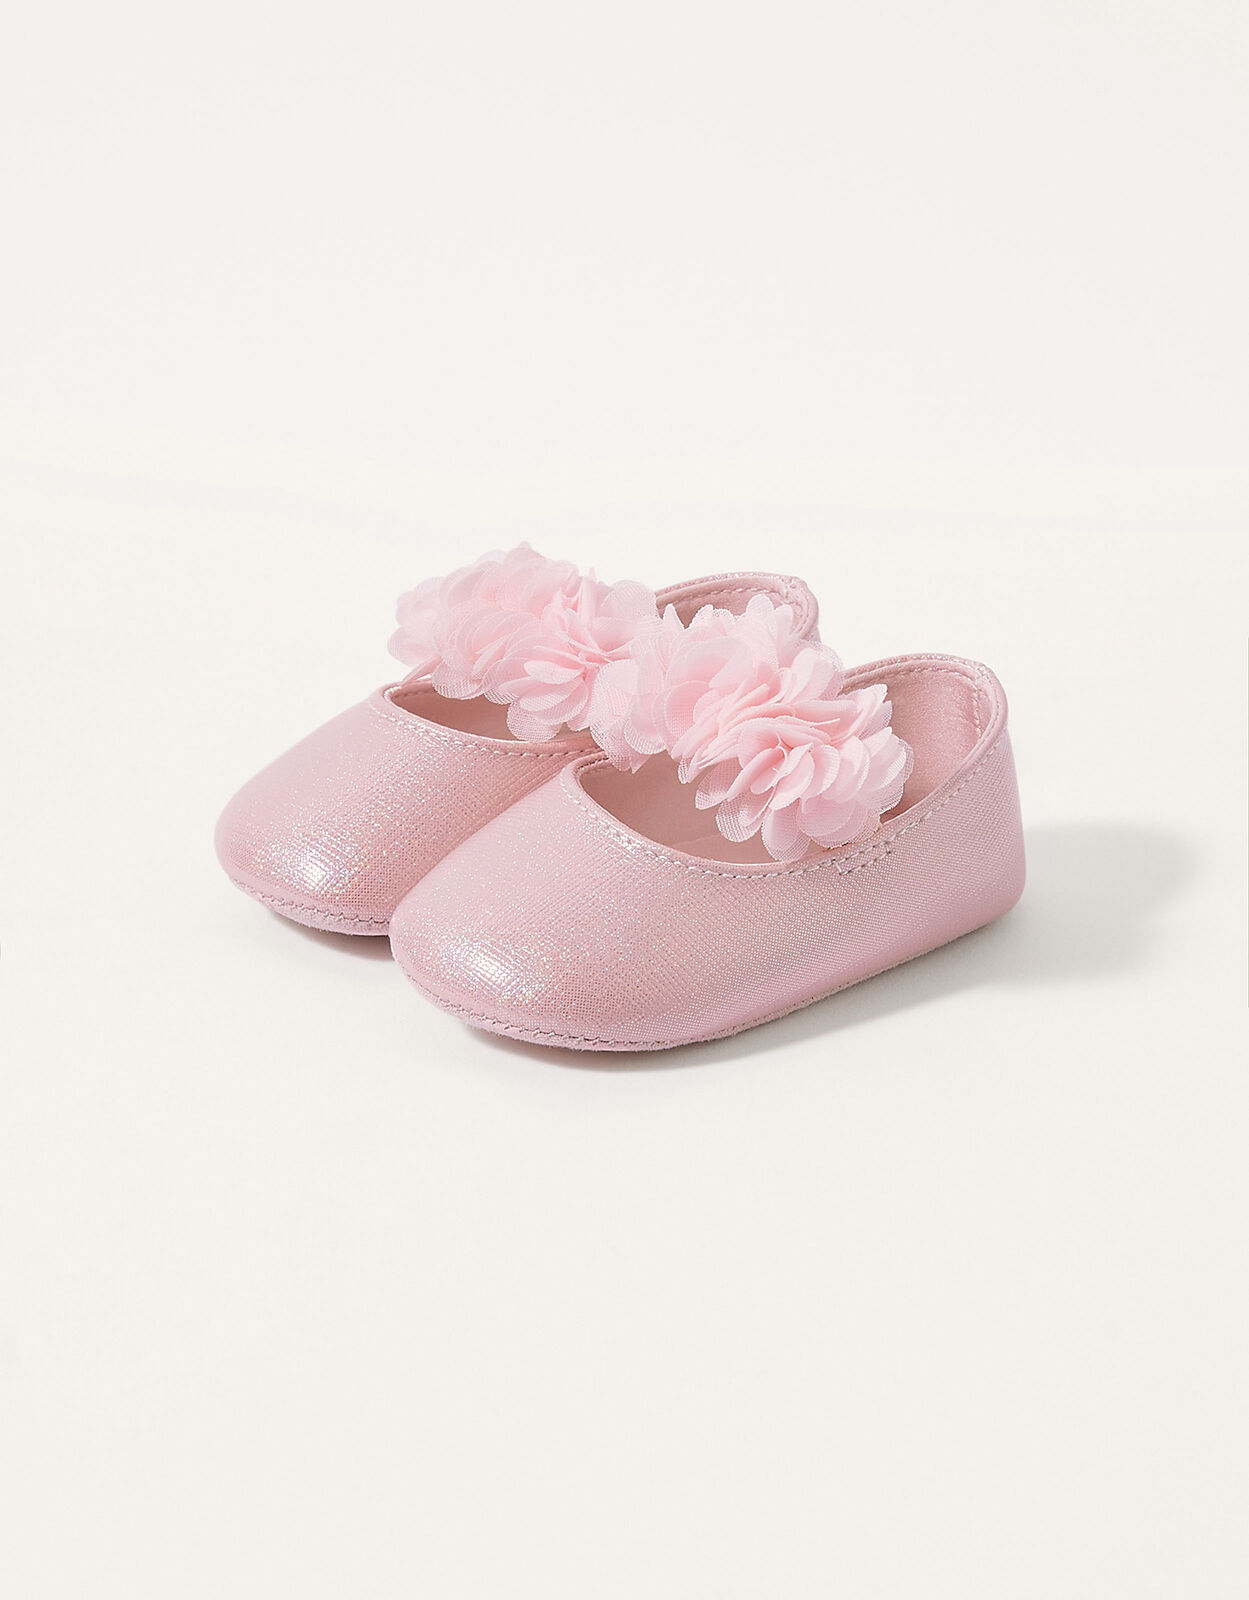 Toddler slippers, Shoes + FREE SHIPPING | Zappos.com